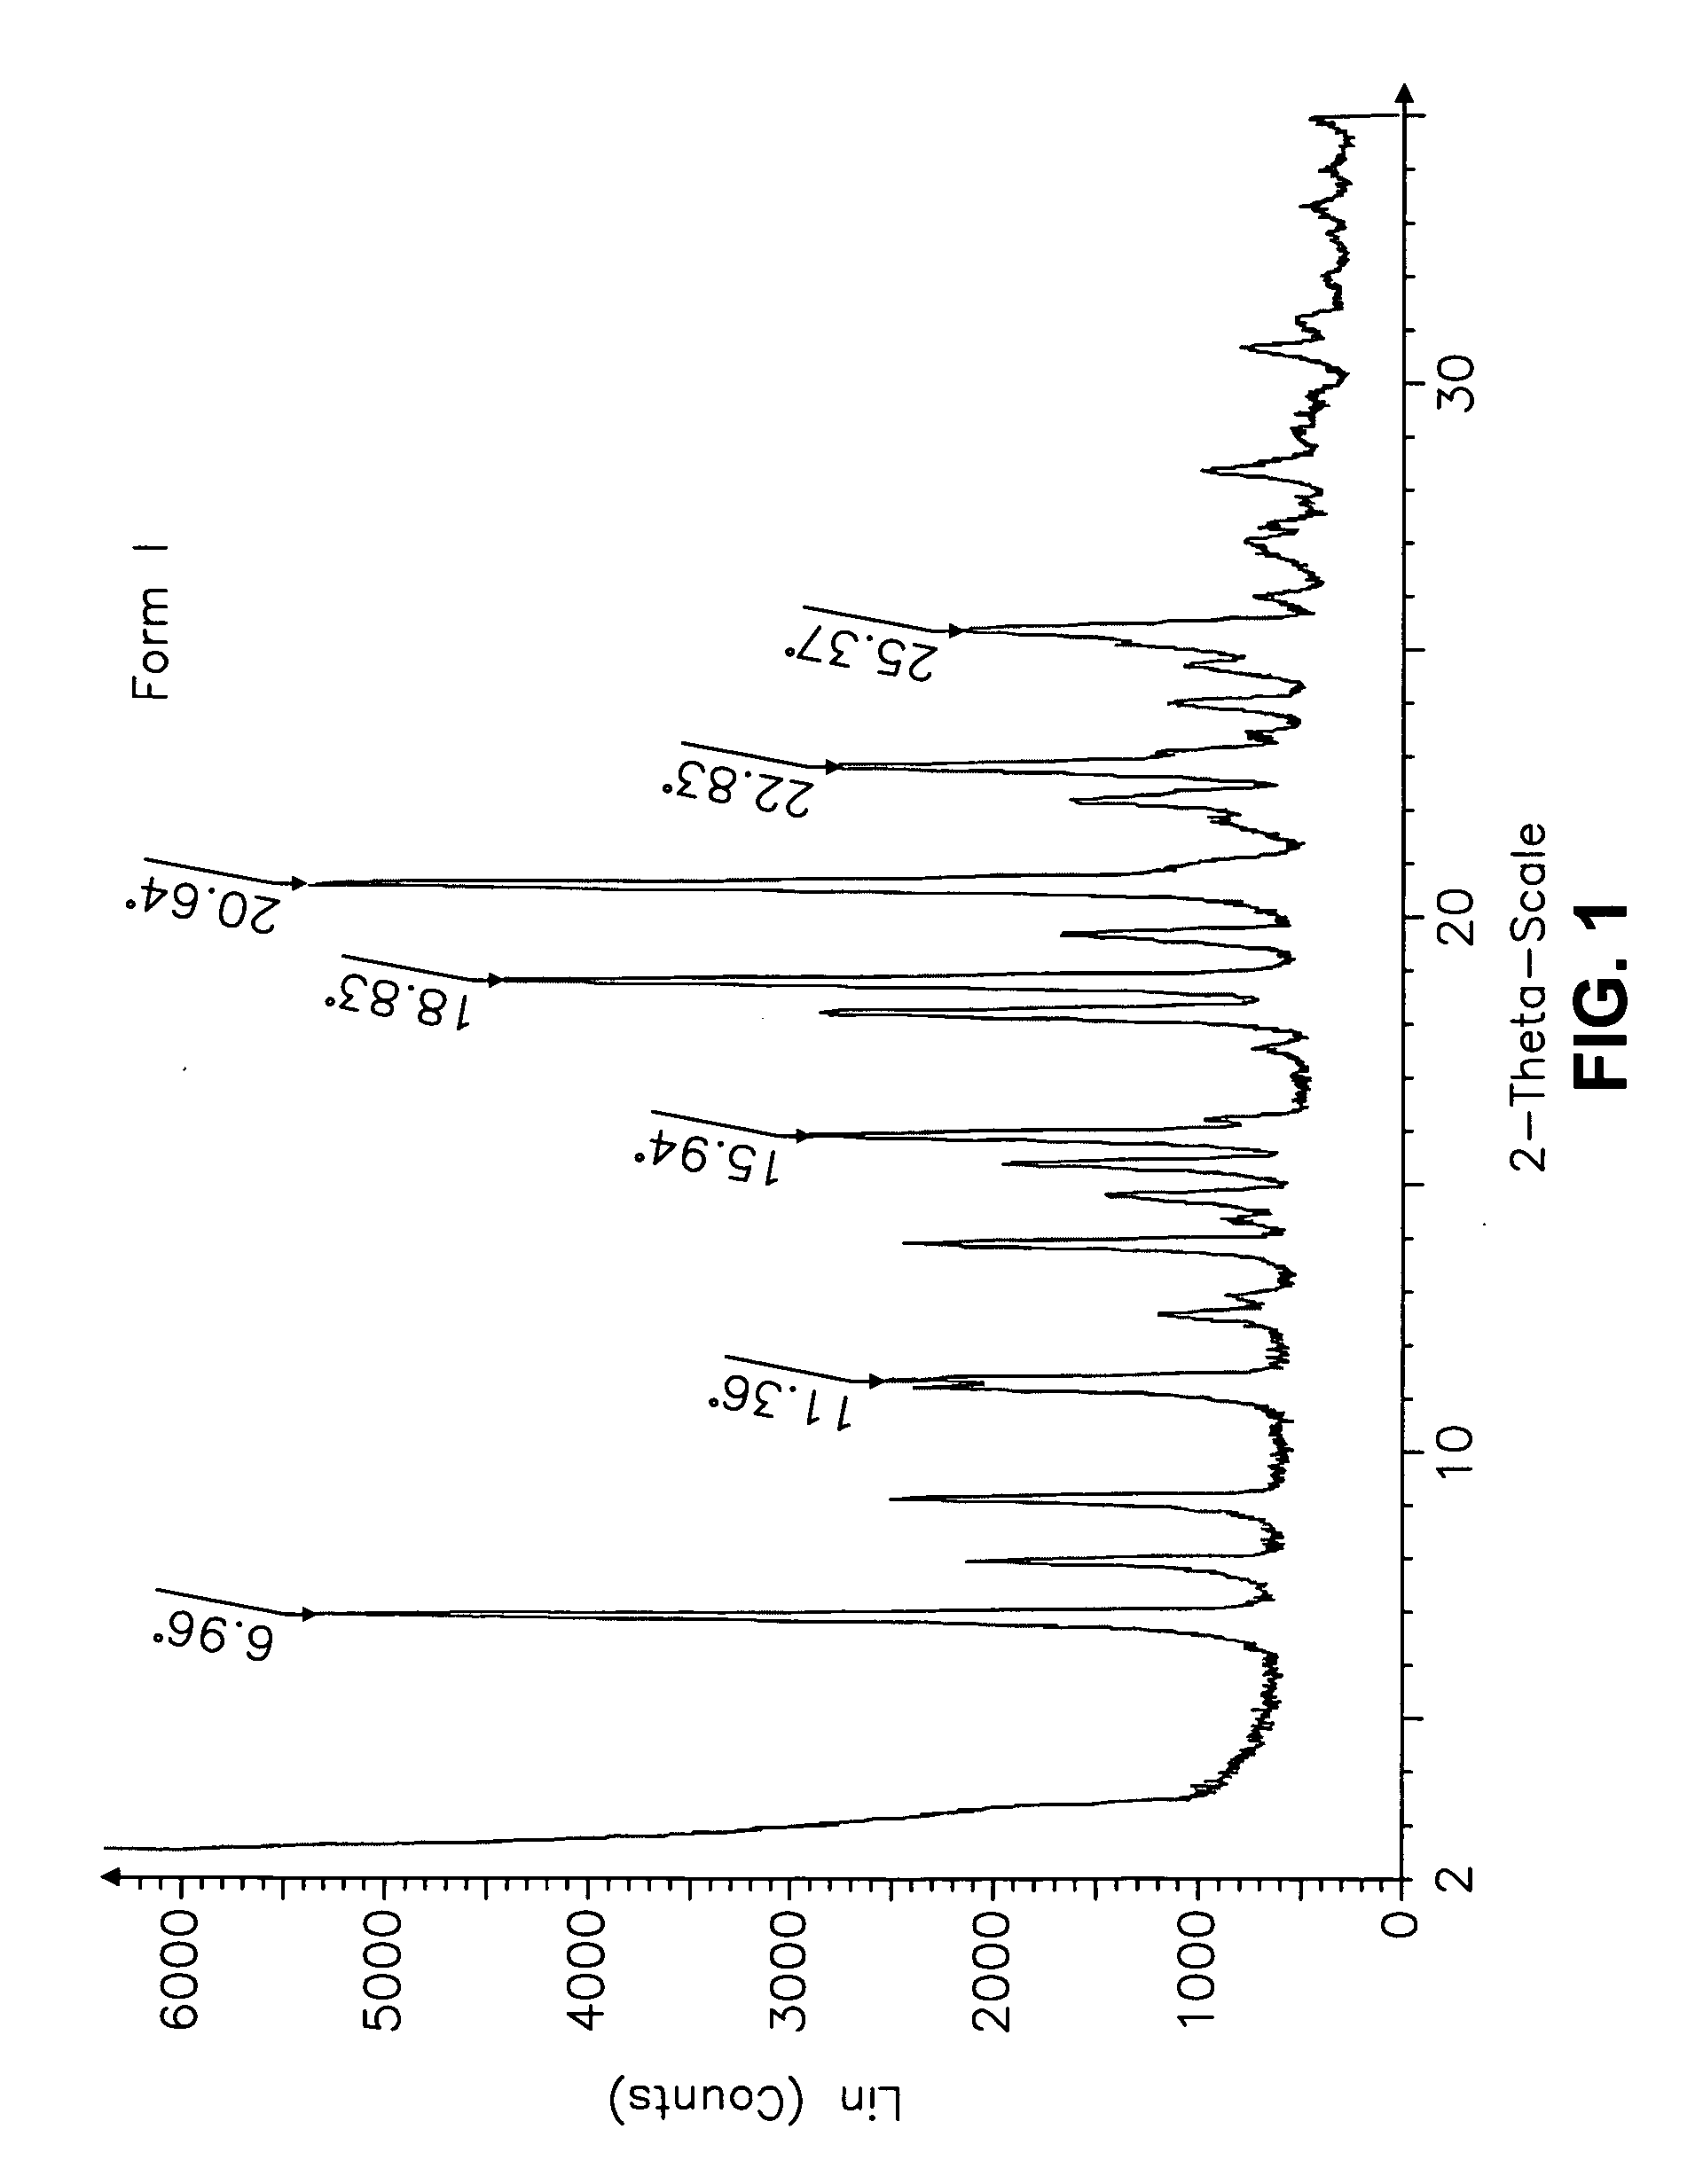 Carvedilol free base, salts, anhydrous forms or solvates thereof, corresponding pharmaceutical compositions, controlled release formulations, and treatment or delivery methods